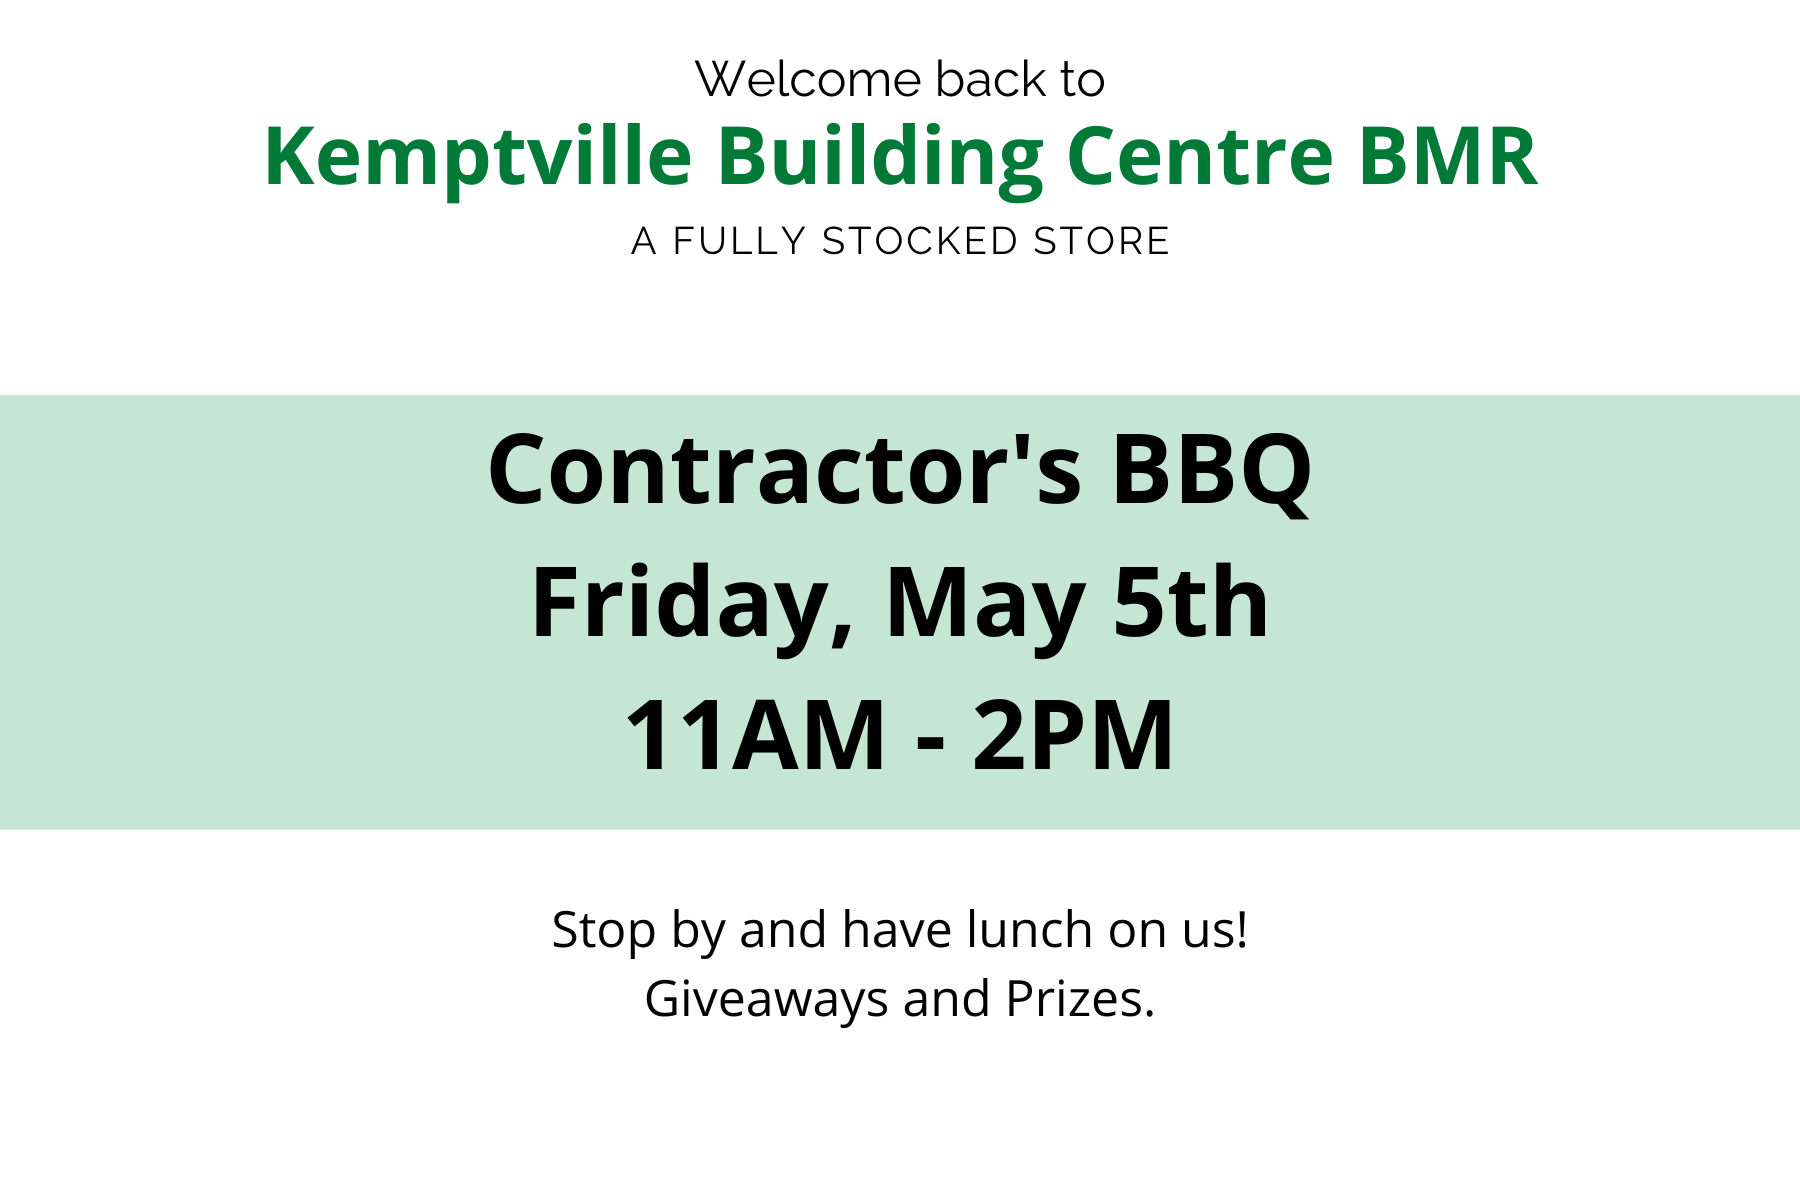 Welcome-back-to-Kemptville-Building-Centre-BMR-A-FULLY-STOCKED-STORE-Contractors-BBQ-Friday-May-5th-11AM-2PM-Stop-by-and-have-lunch-on-us-Giveaways-and-Prizes.1